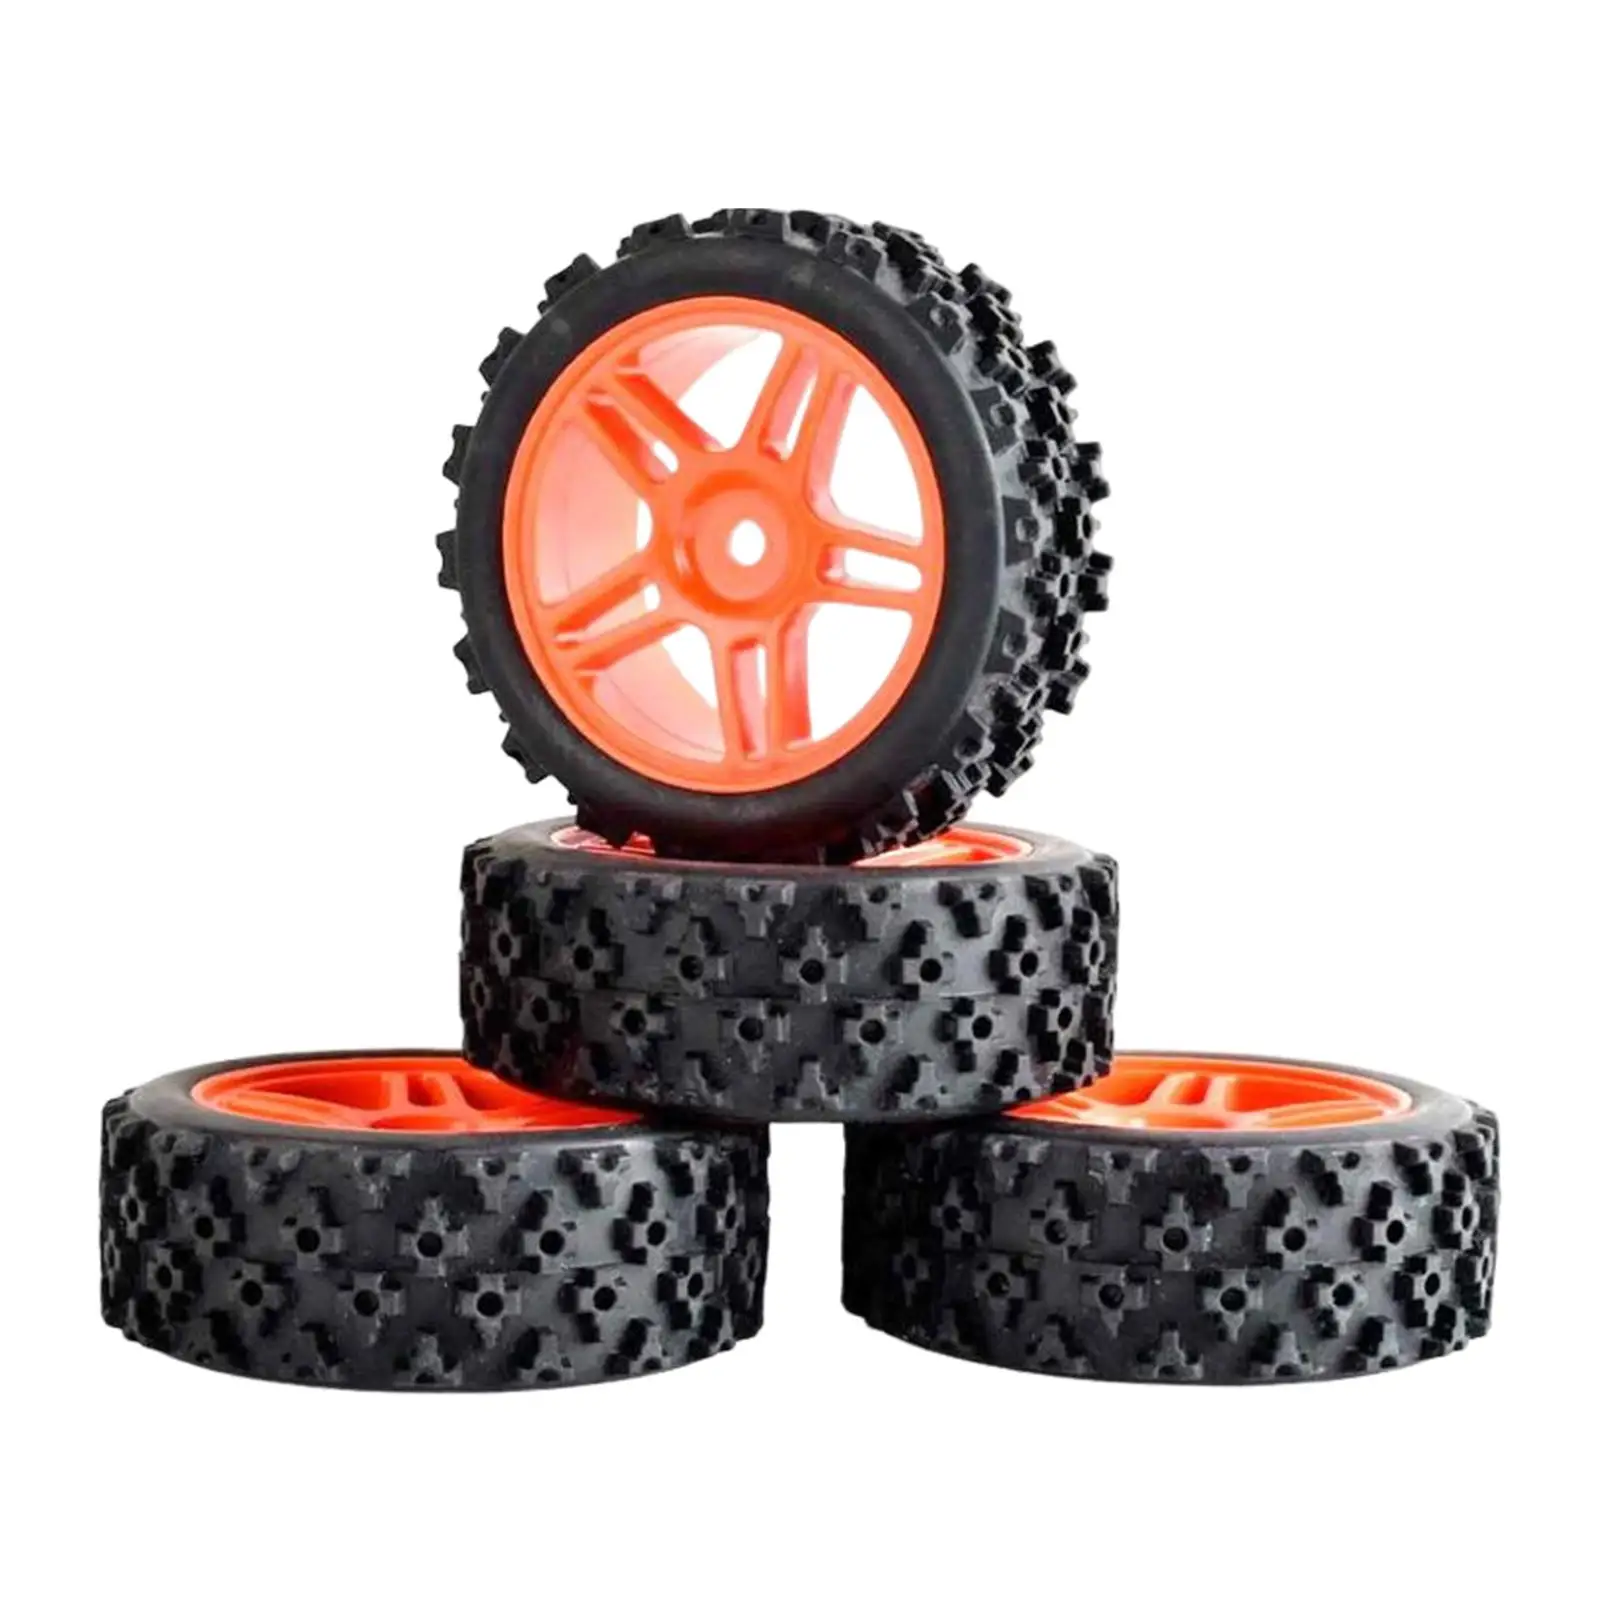 4x RC Rubber Wheels & Tires Durable Replacement for Wltoys 144001 124018 124019 Buggy Parts Remote Control Vehicle Hobby Model